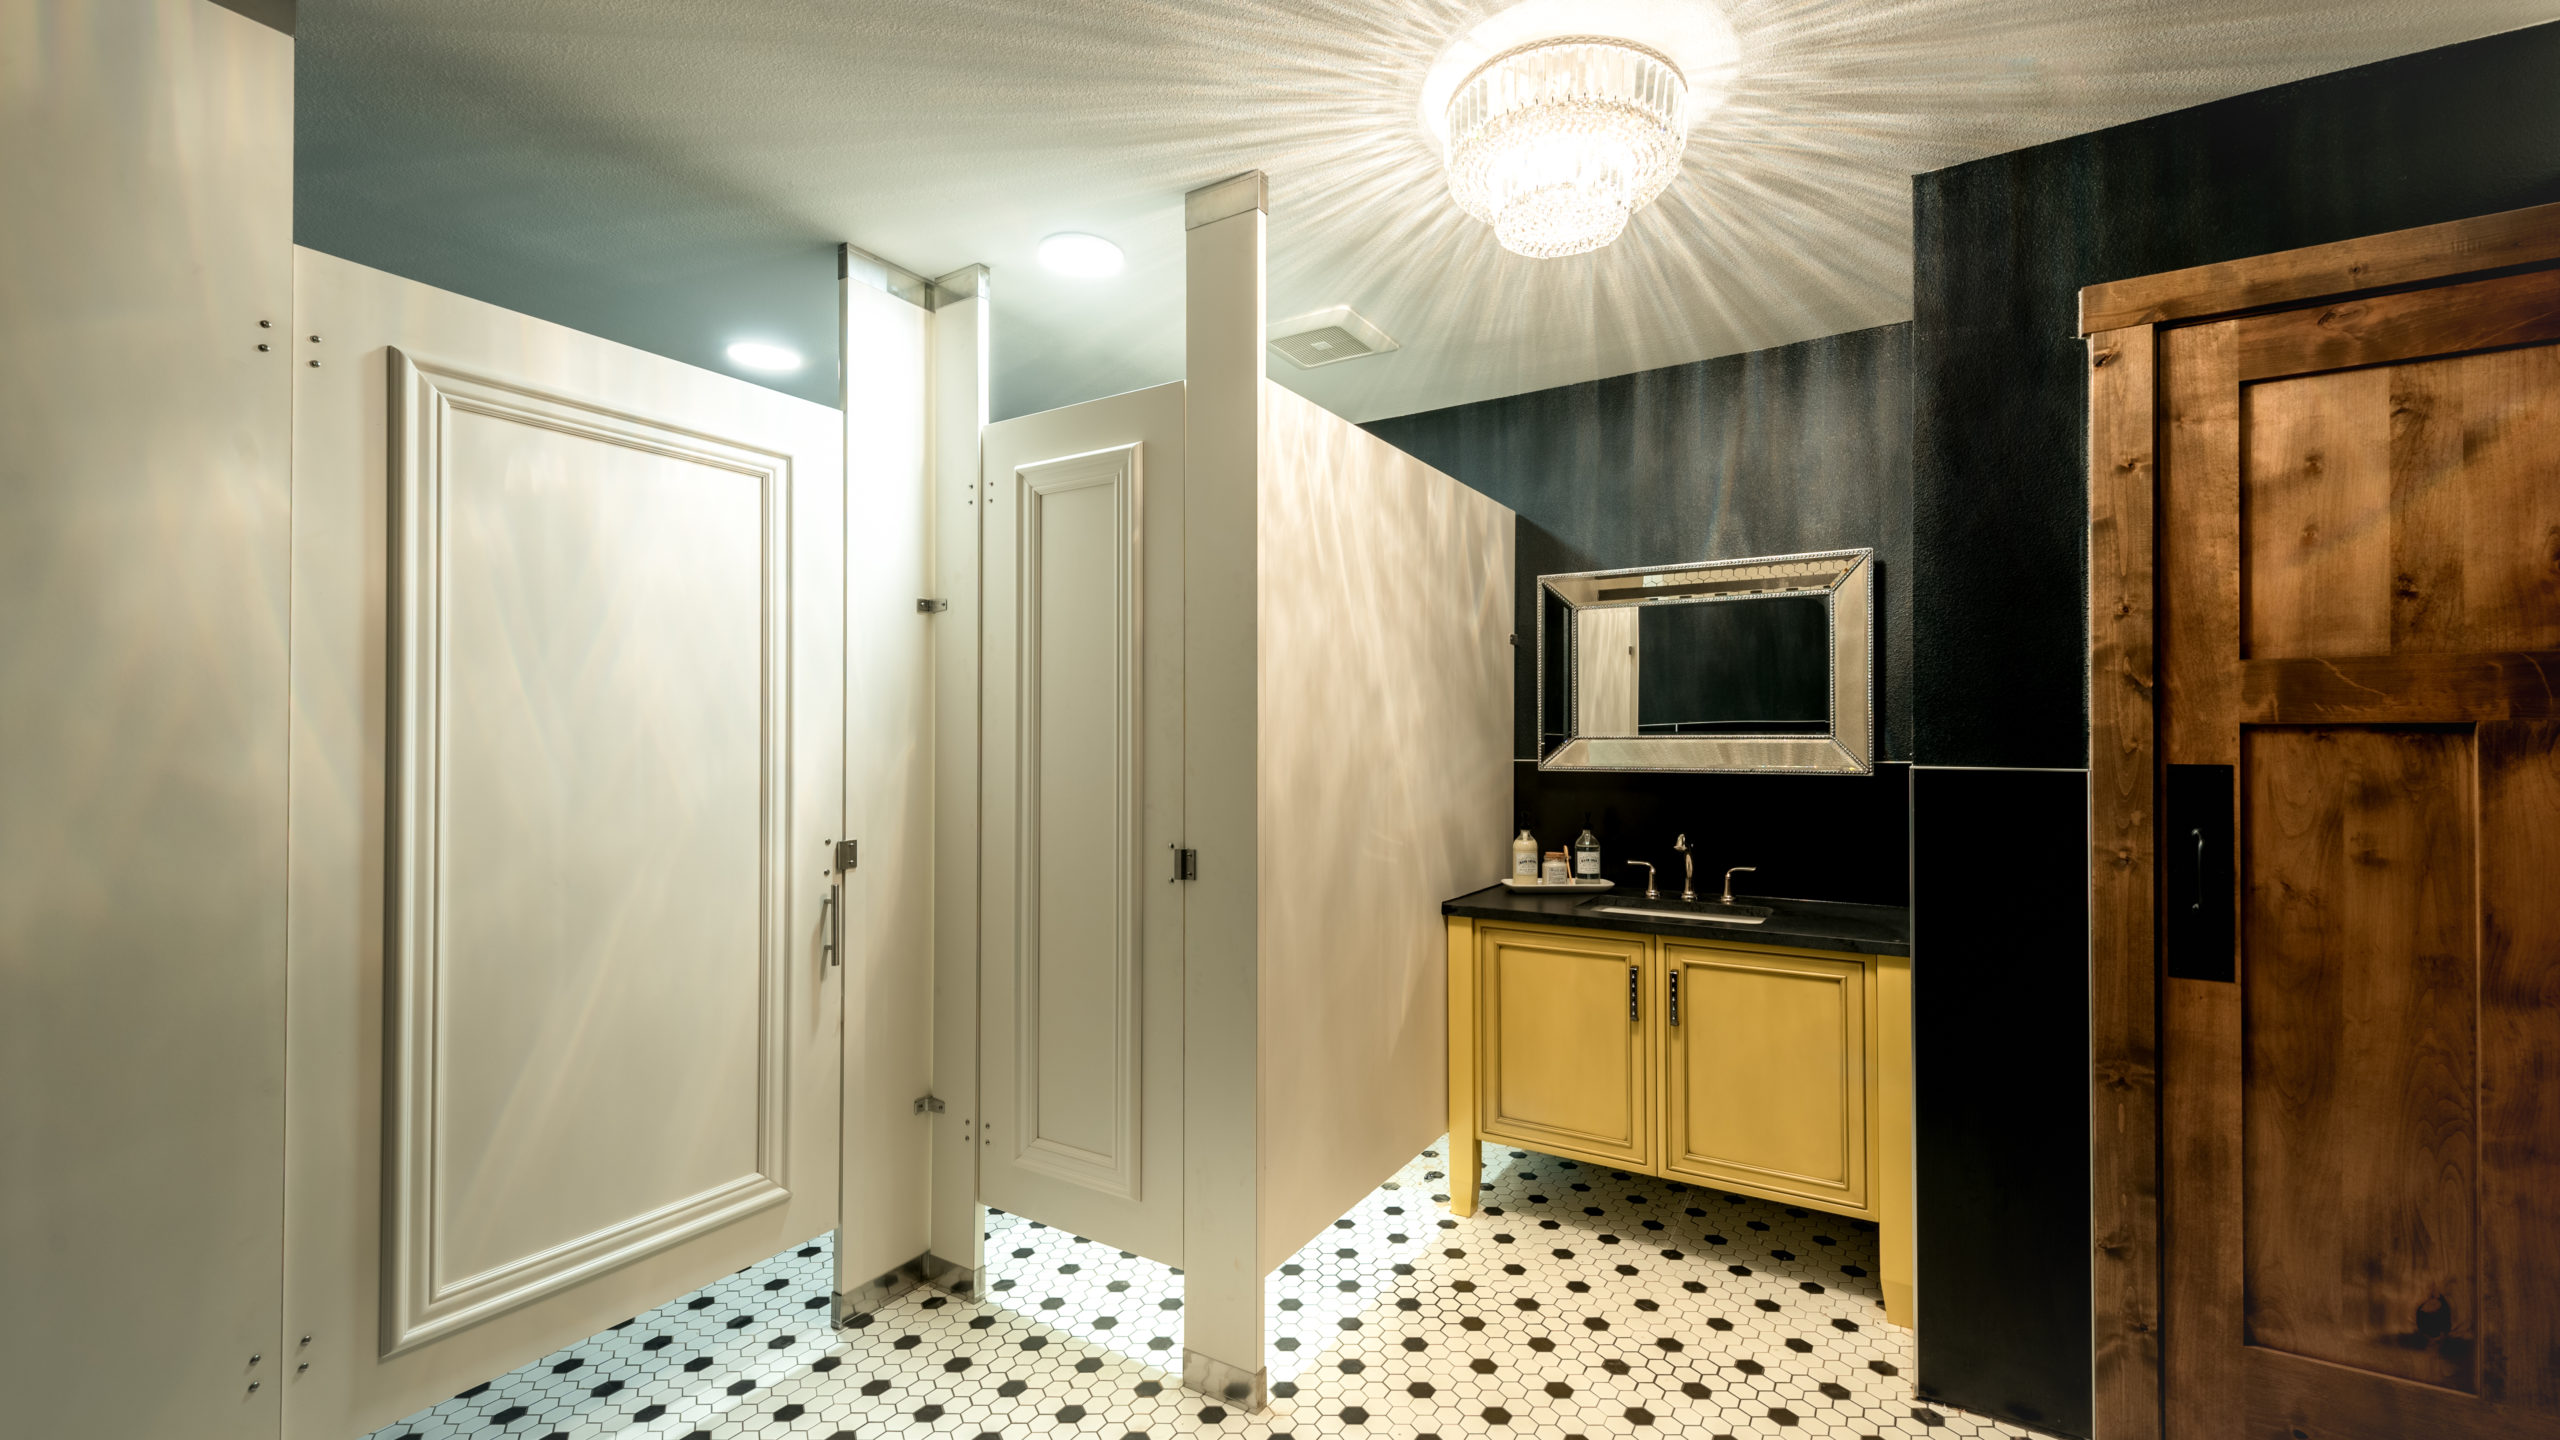 Designer showroom bathroom with white laminate partitions show doors with picture frame molding. Yellow vanity, silver framed mirror and chandelier.